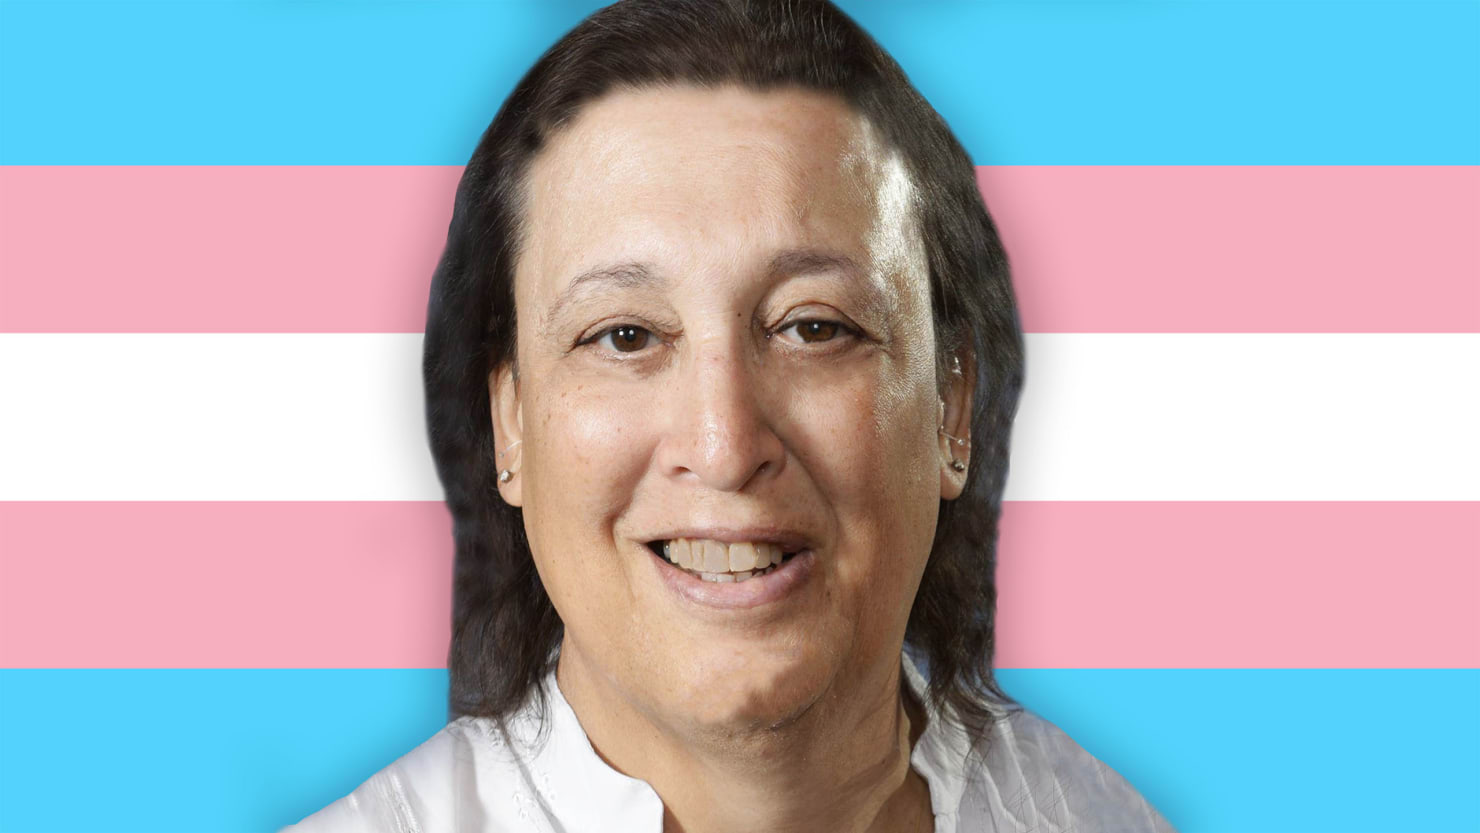 All about the Trans flag - HER